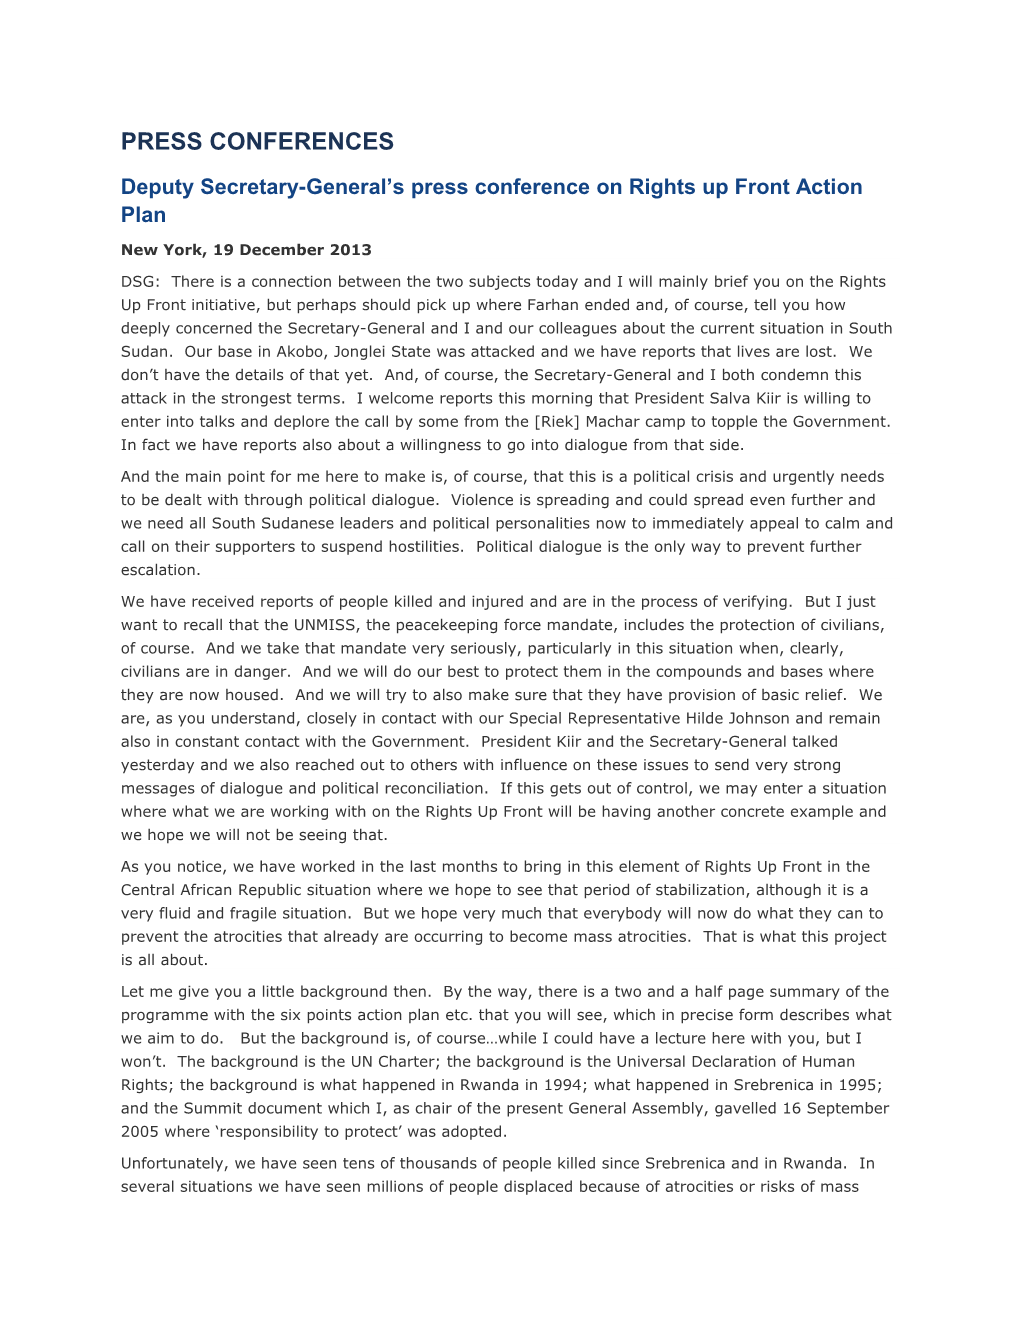 Deputy Secretary-General S Press Conference on Rights up Front Action Plan